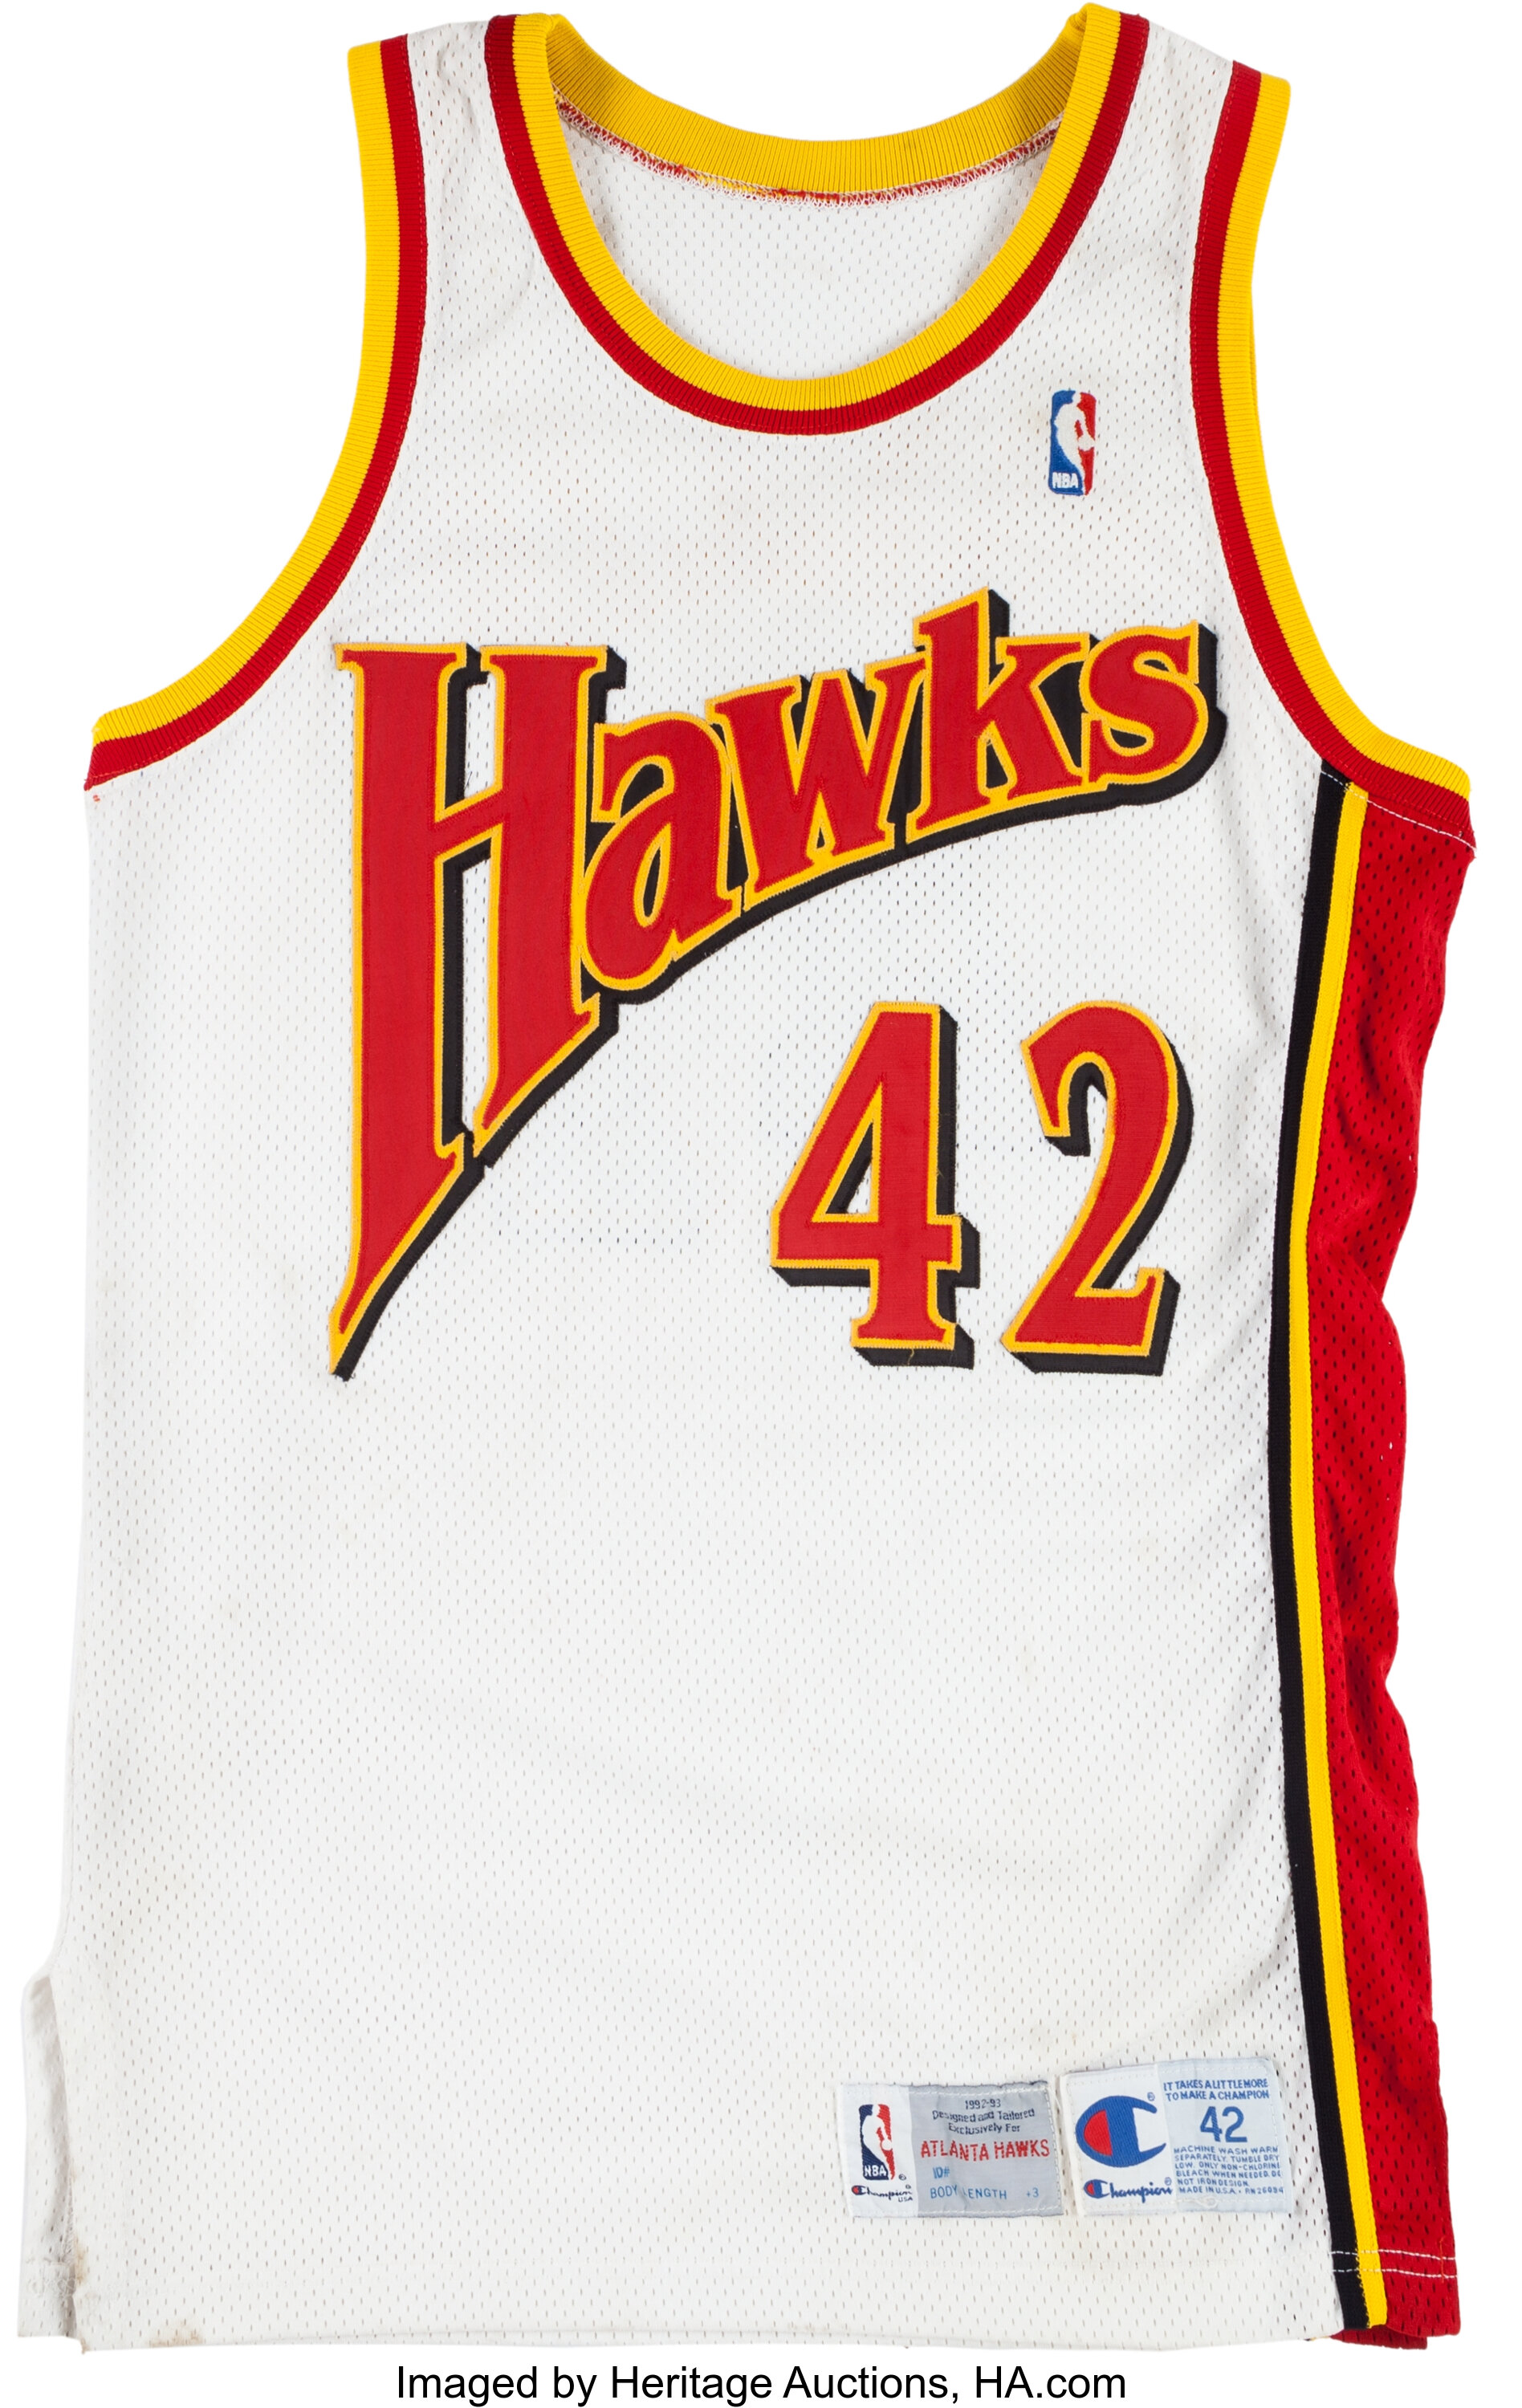 1990s Atlanta Hawks #55 Game Issued Red/White Reversible Practice Jersey  DP15060